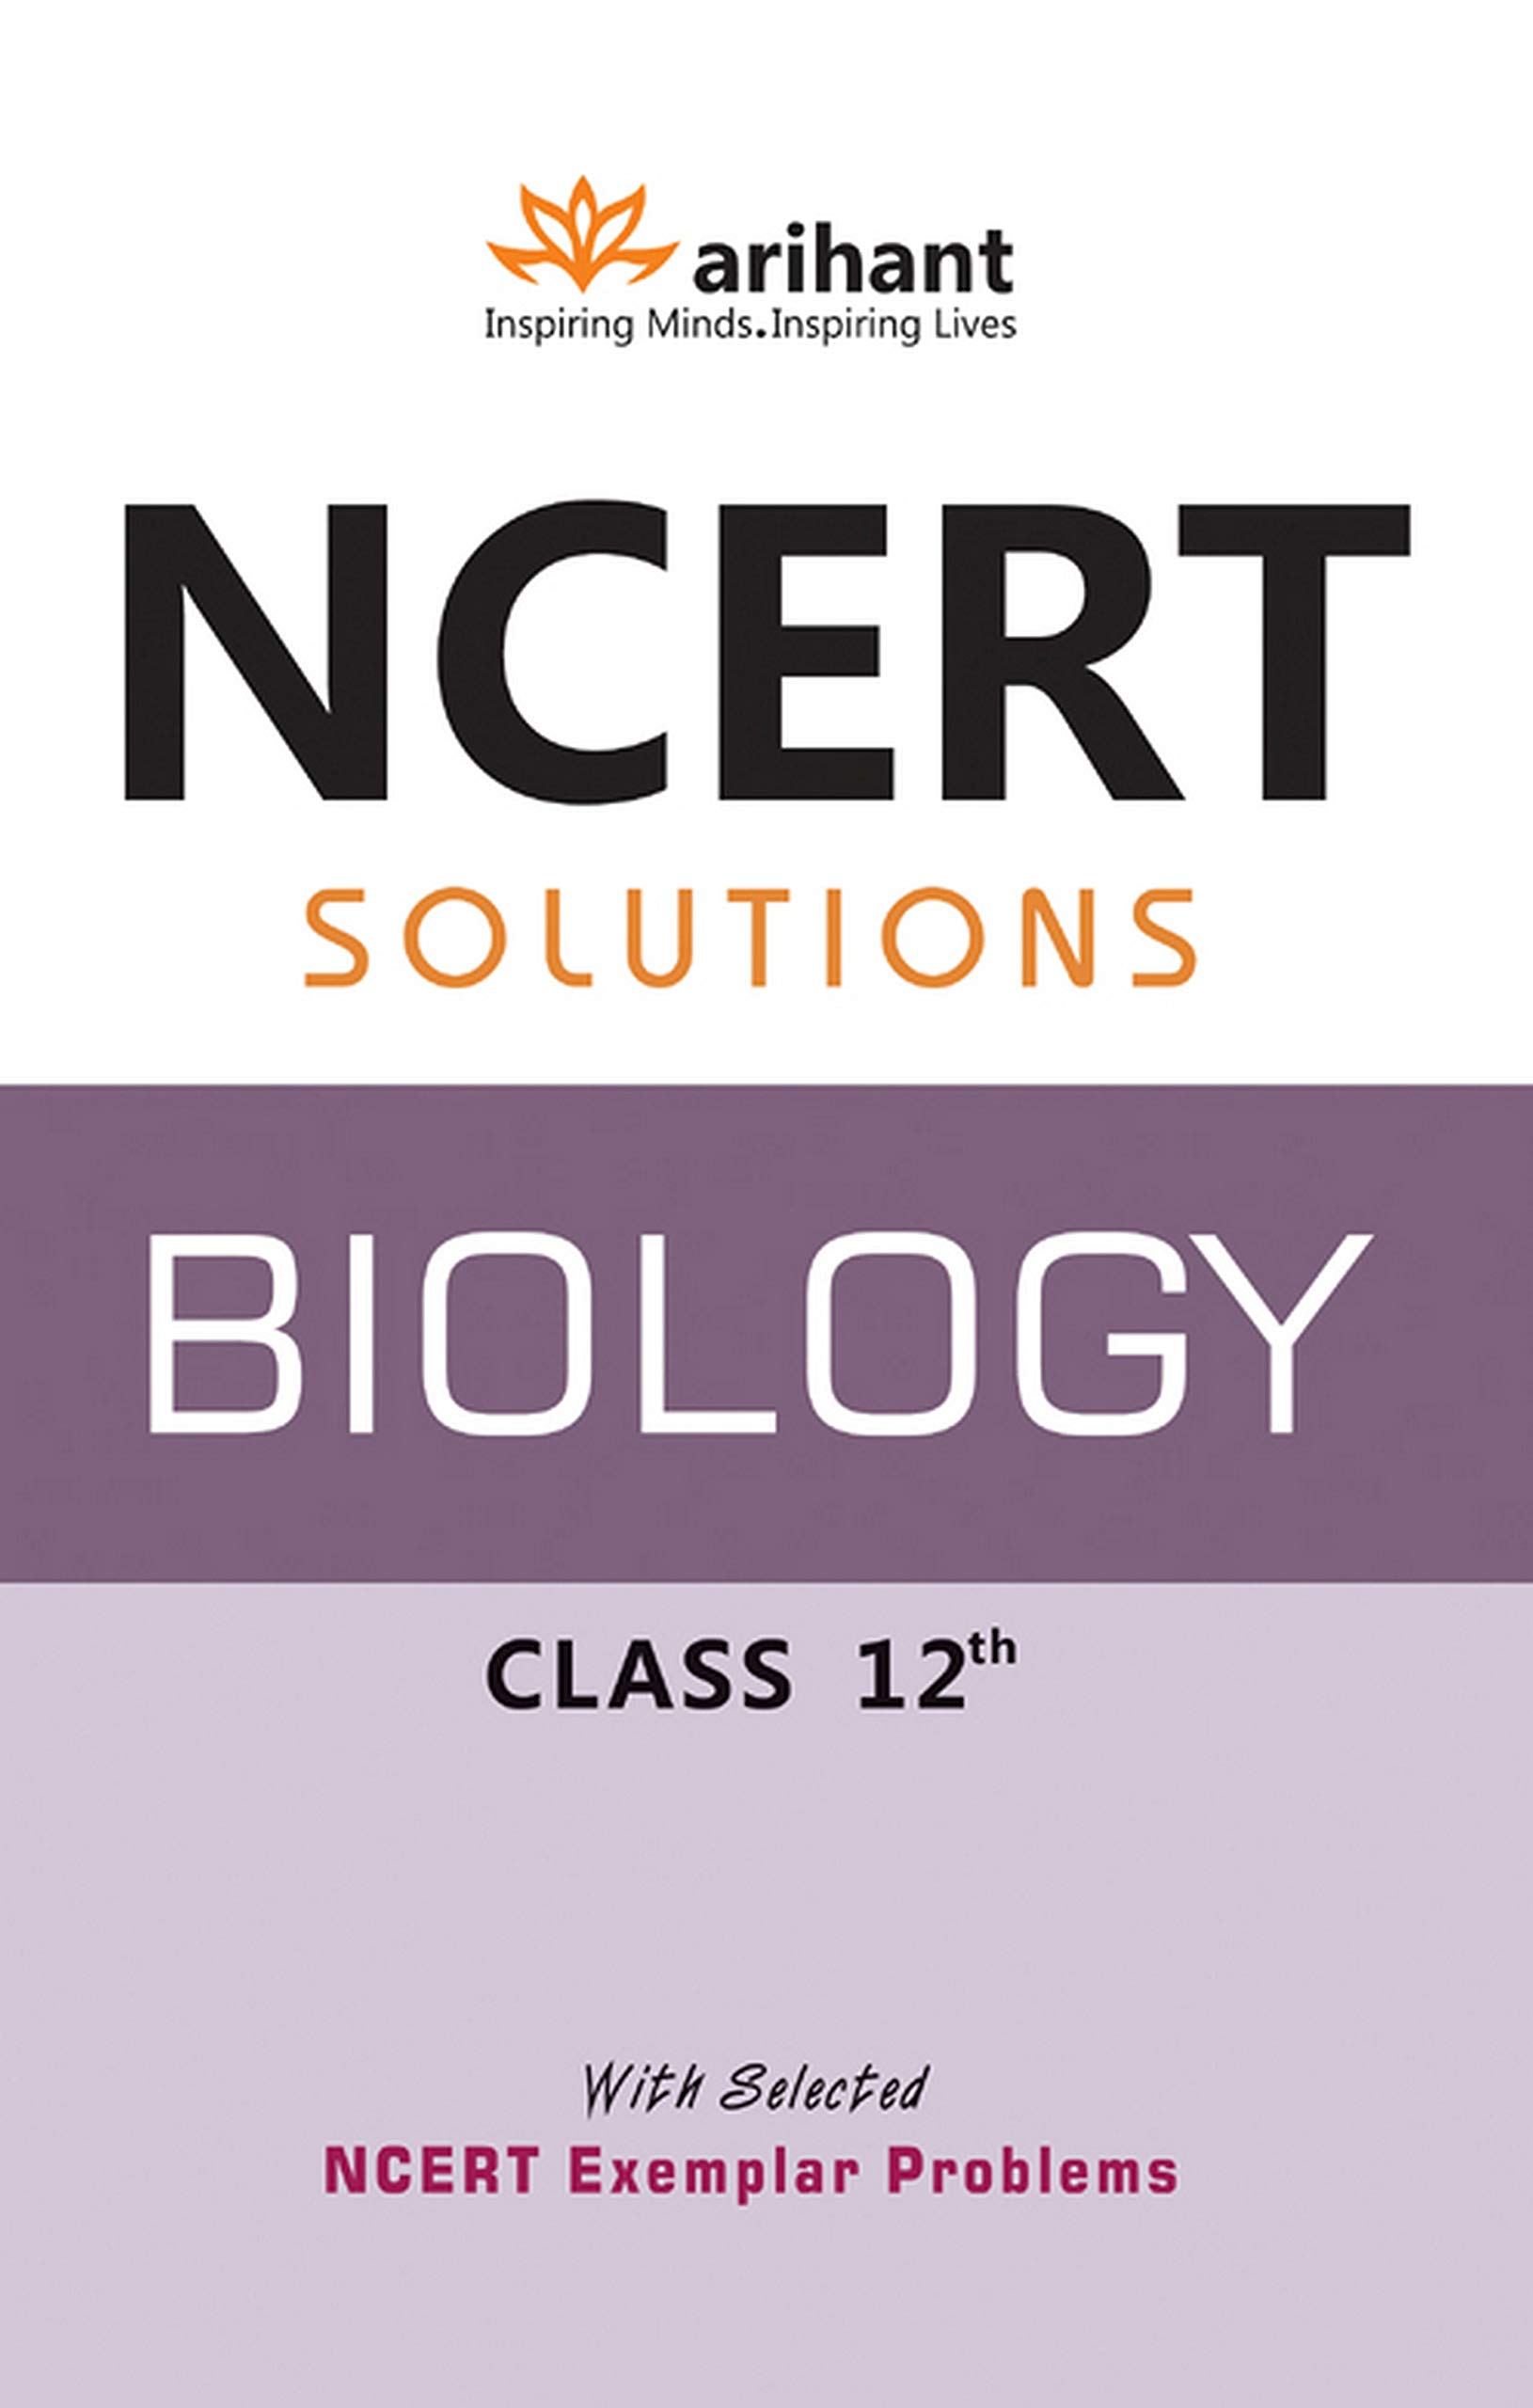 NCERT Solutions - Biology for Class 12th